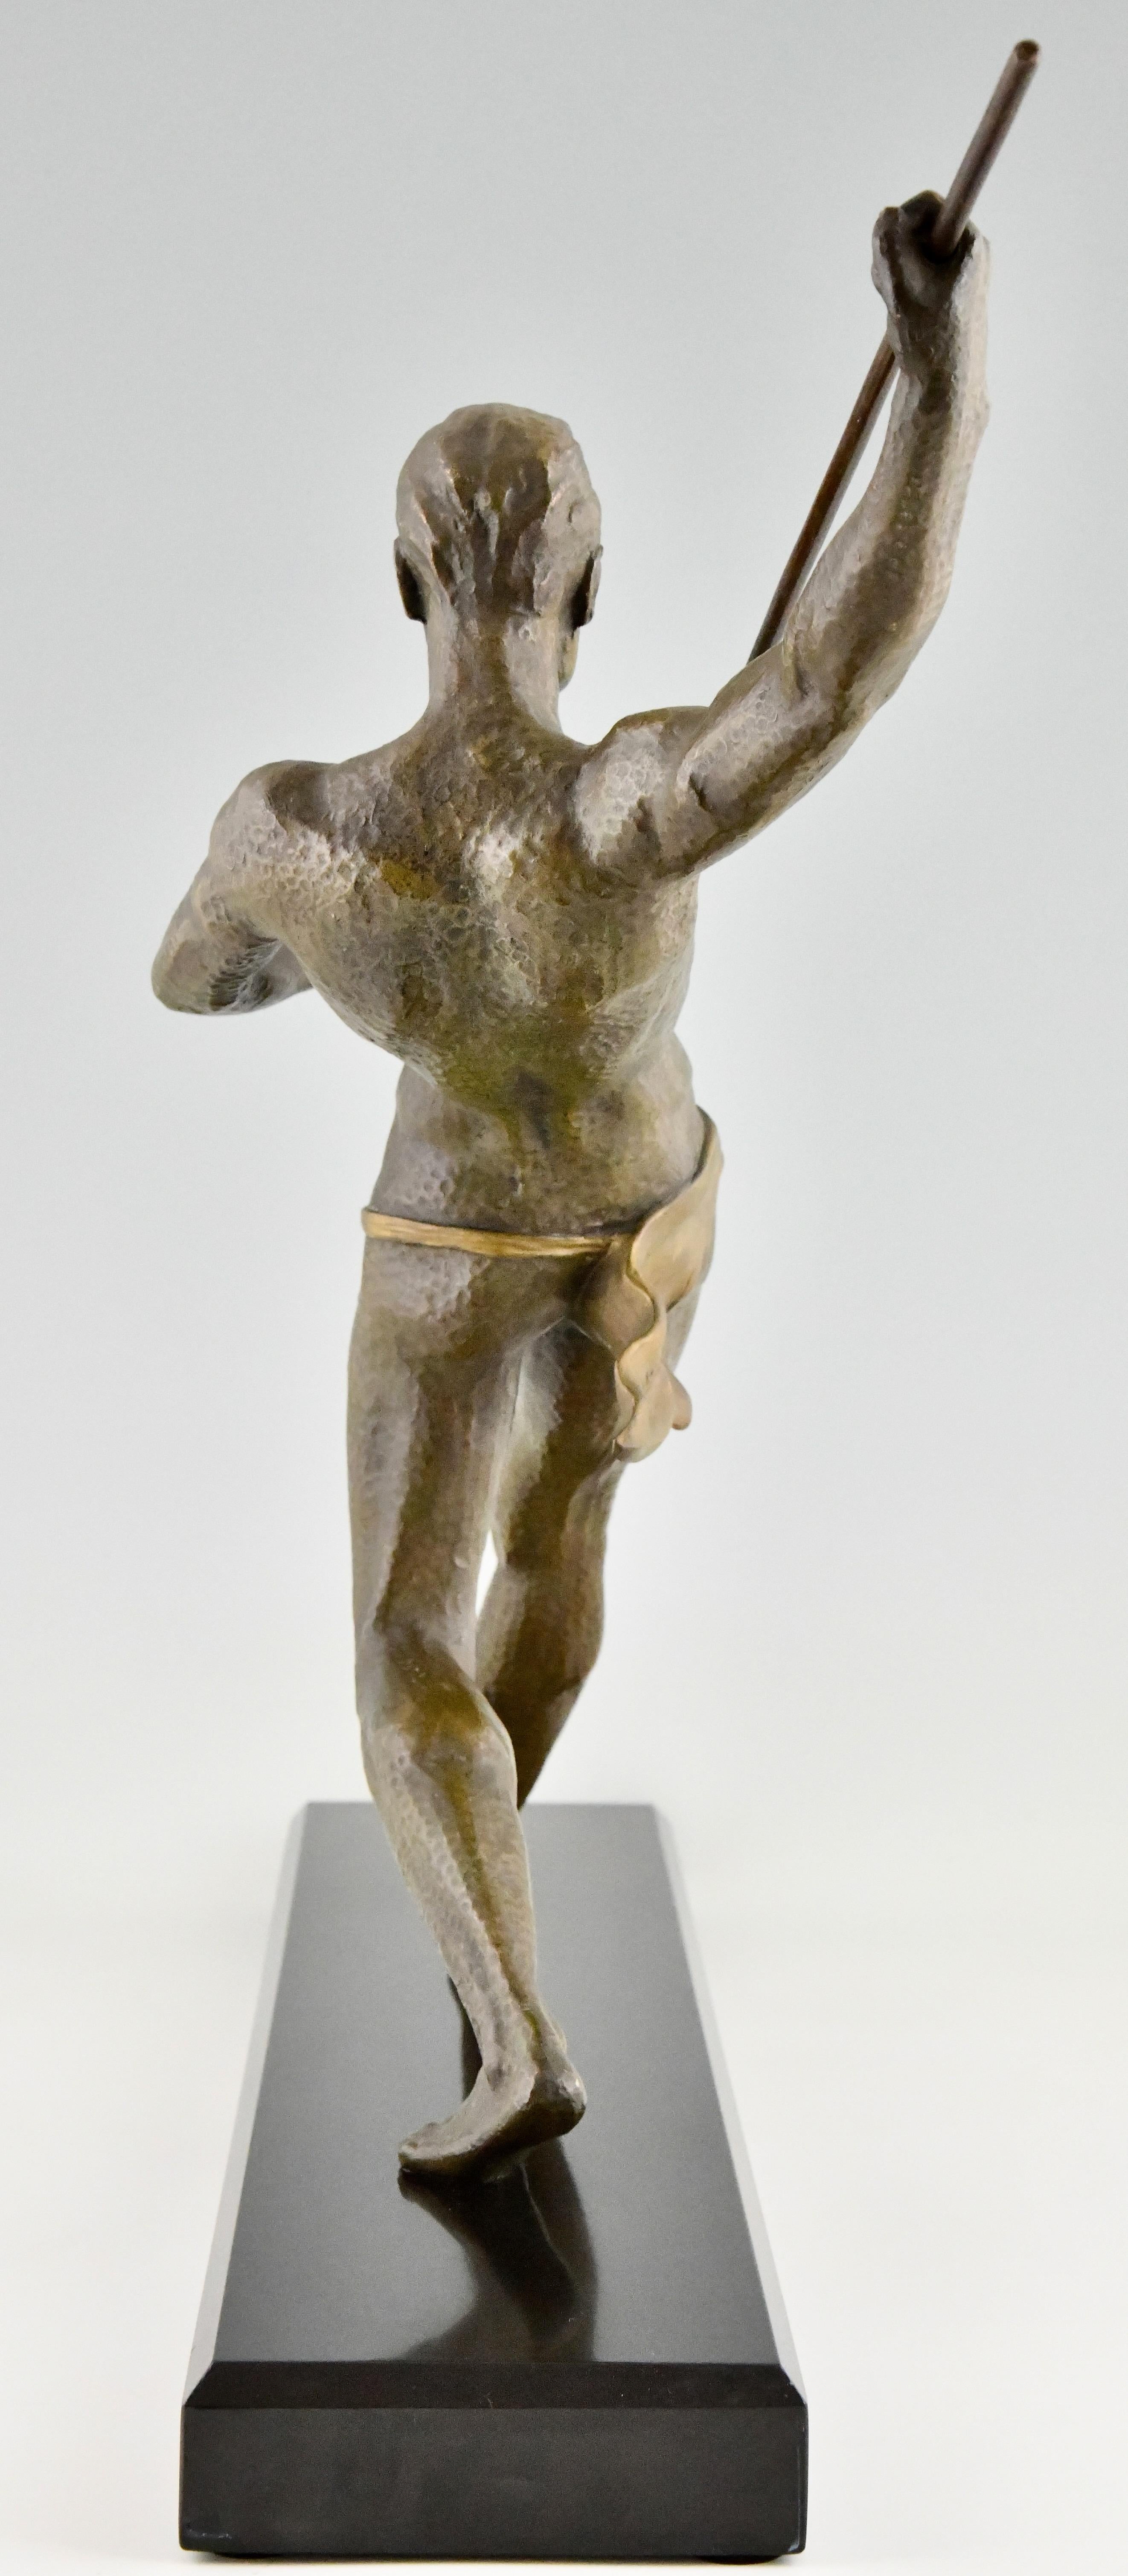 Metal Art Deco sculpture athlete with spear javelin thrower signed by Limousin, 1930. For Sale